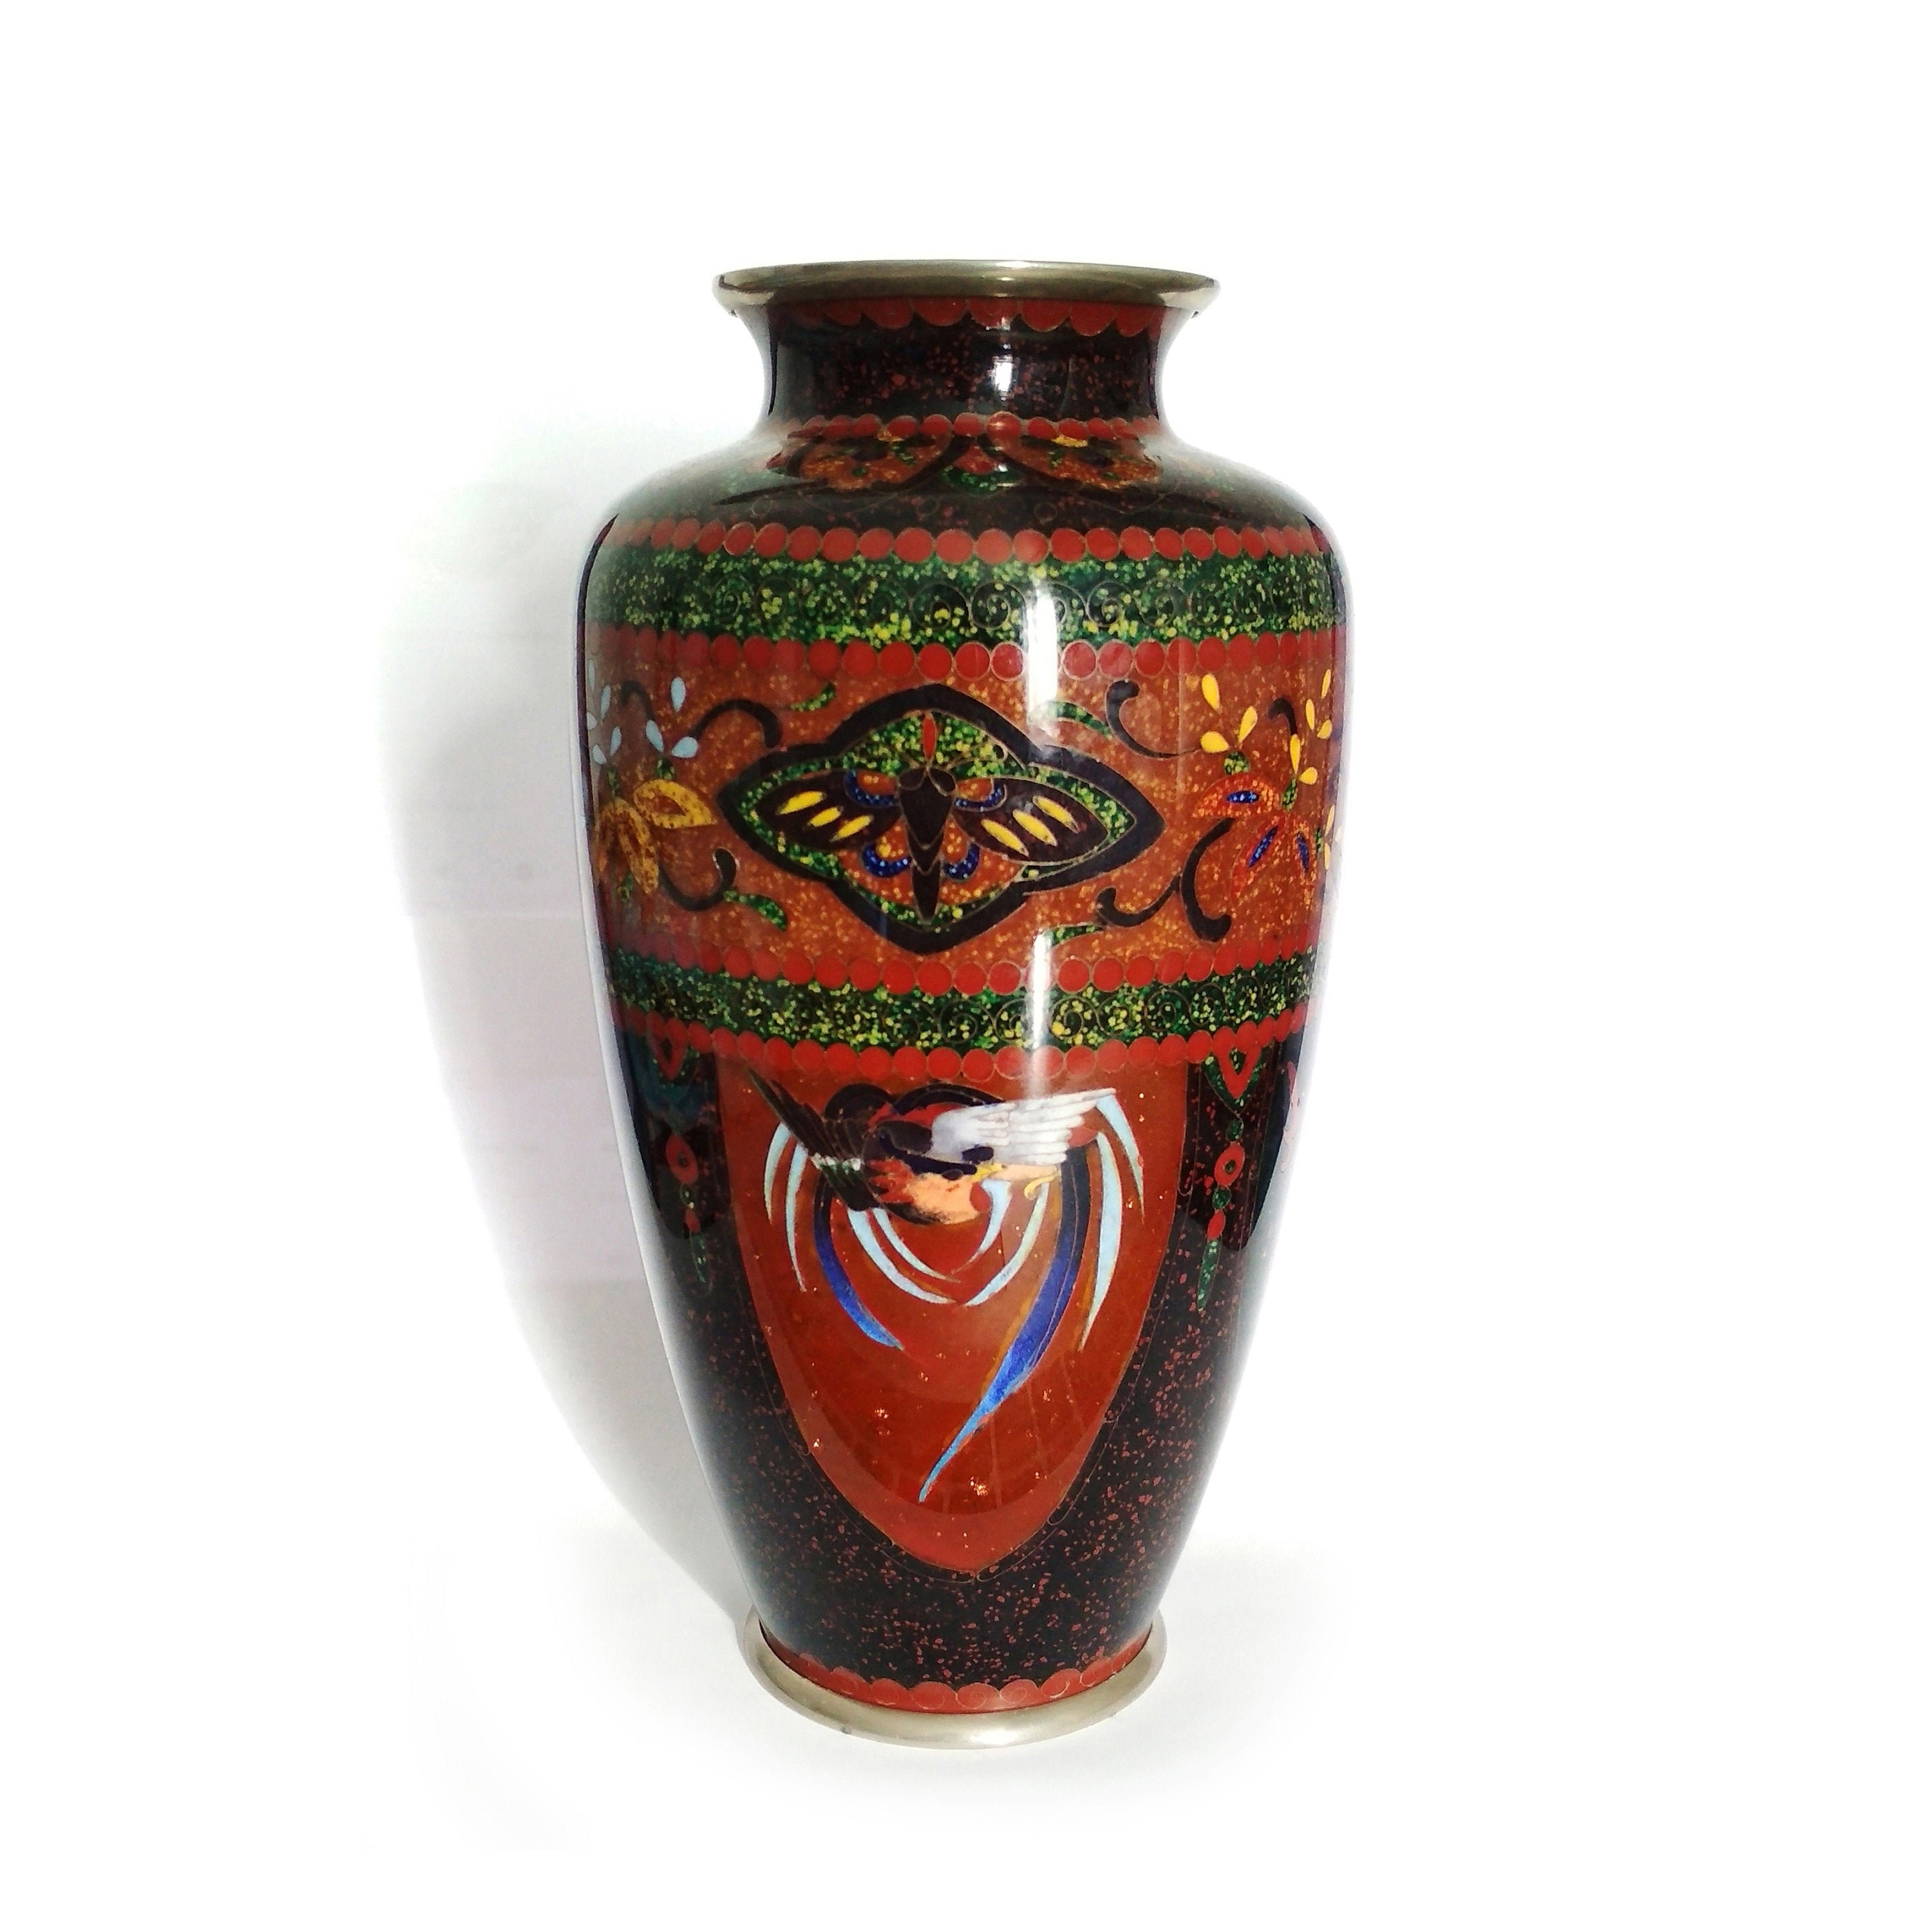 Cloisonne DIY Kitphoenix, Applicable to Adults and Beginners,home  Decoration 